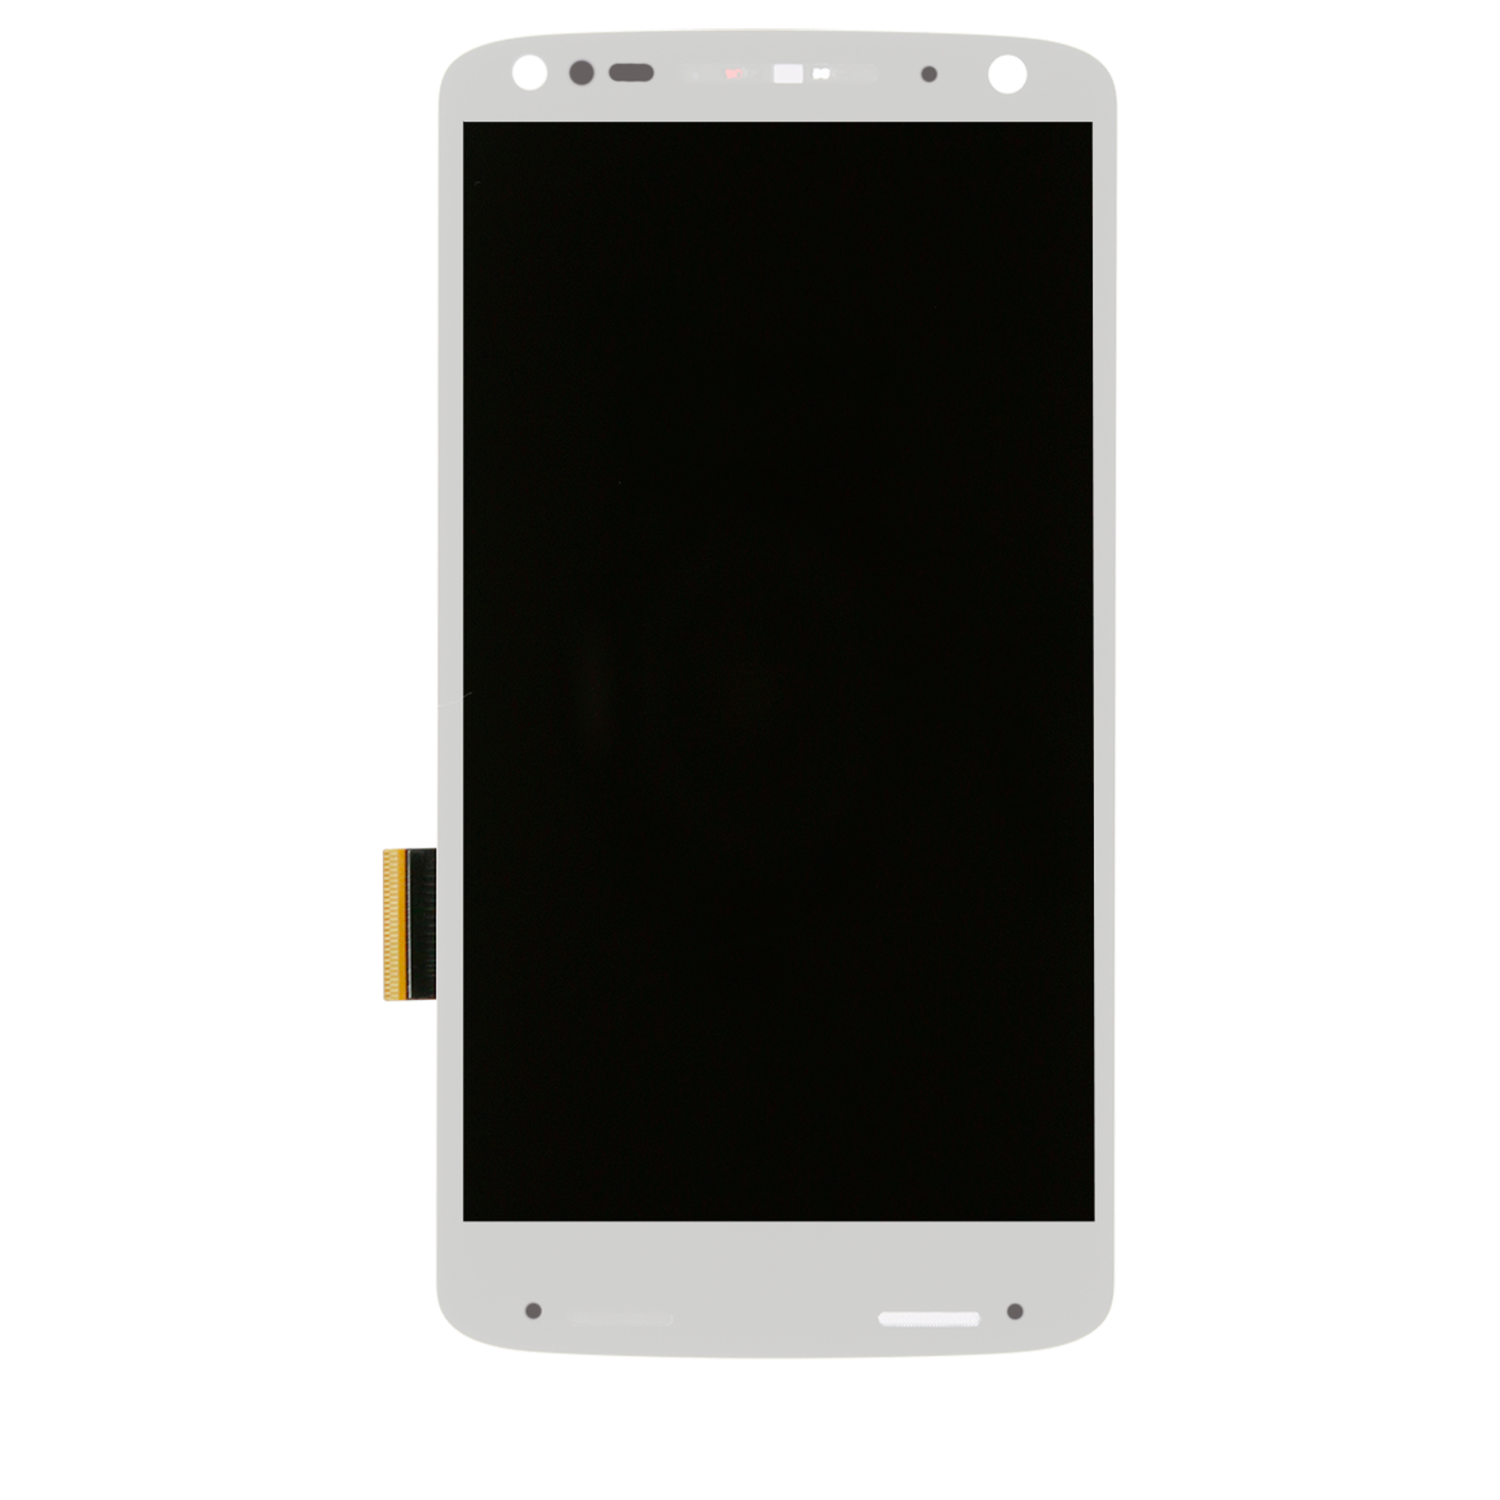 Replacement LCD Assembly Without Frame Compatible For Motorola Moto X Force (XT1580 / 2015) / Droid Turbo 2 (XT1585 / 2015) (Refurbished) (White)